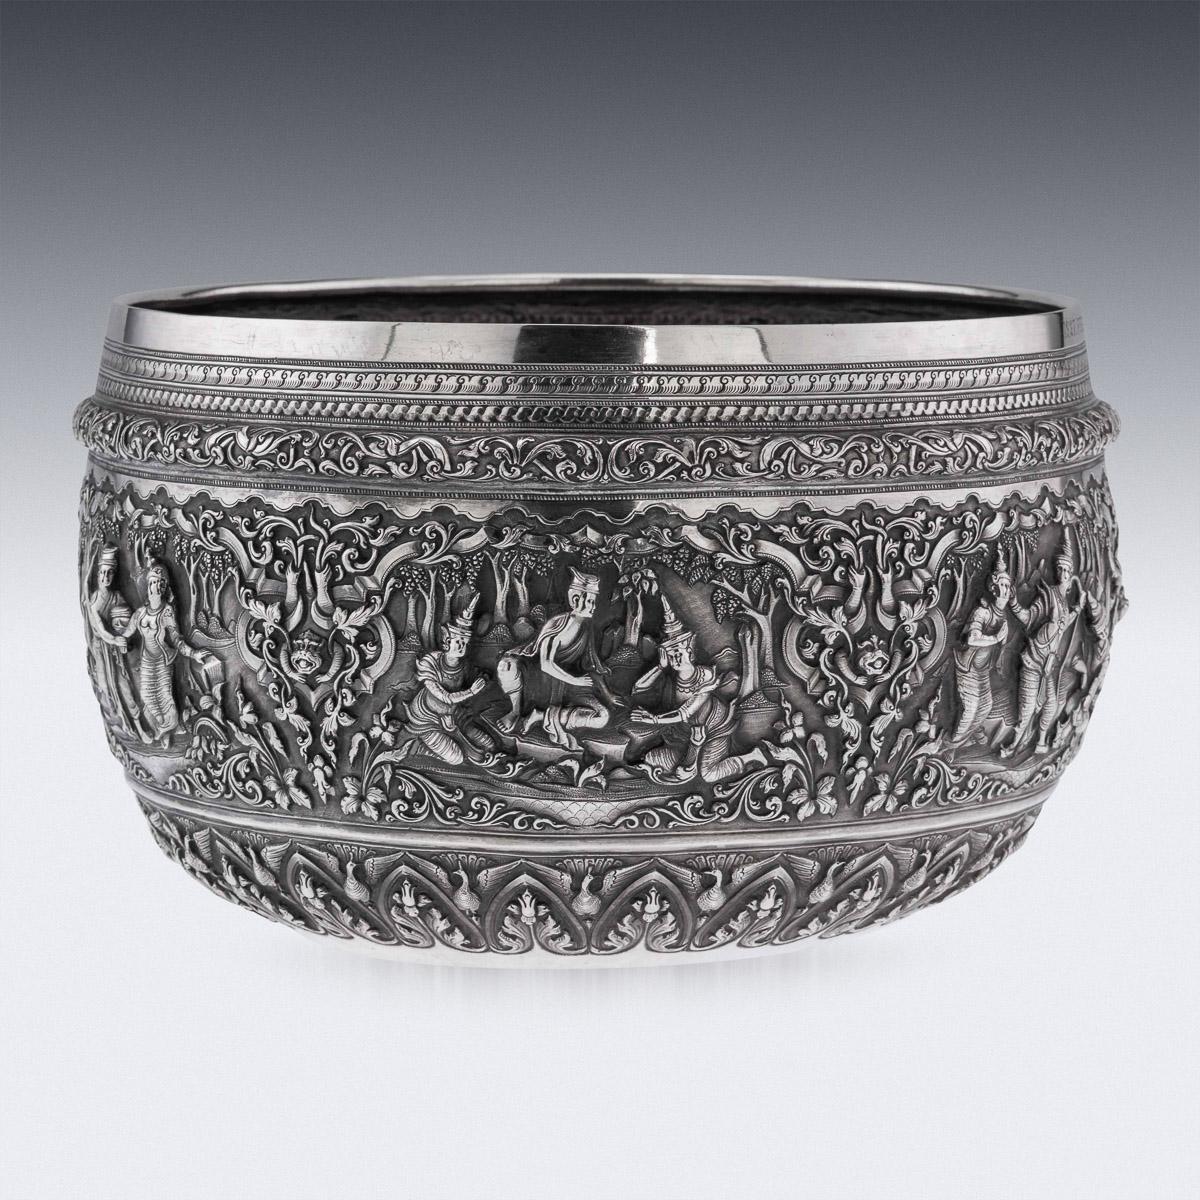 Antique early-20th century Burmese (Myanmar) exceptional solid silver repousse' bowl, decorated in high relief depicting six different traditional scenes from the Burmese mythology, showing very detailed figures set against a chiseled matted